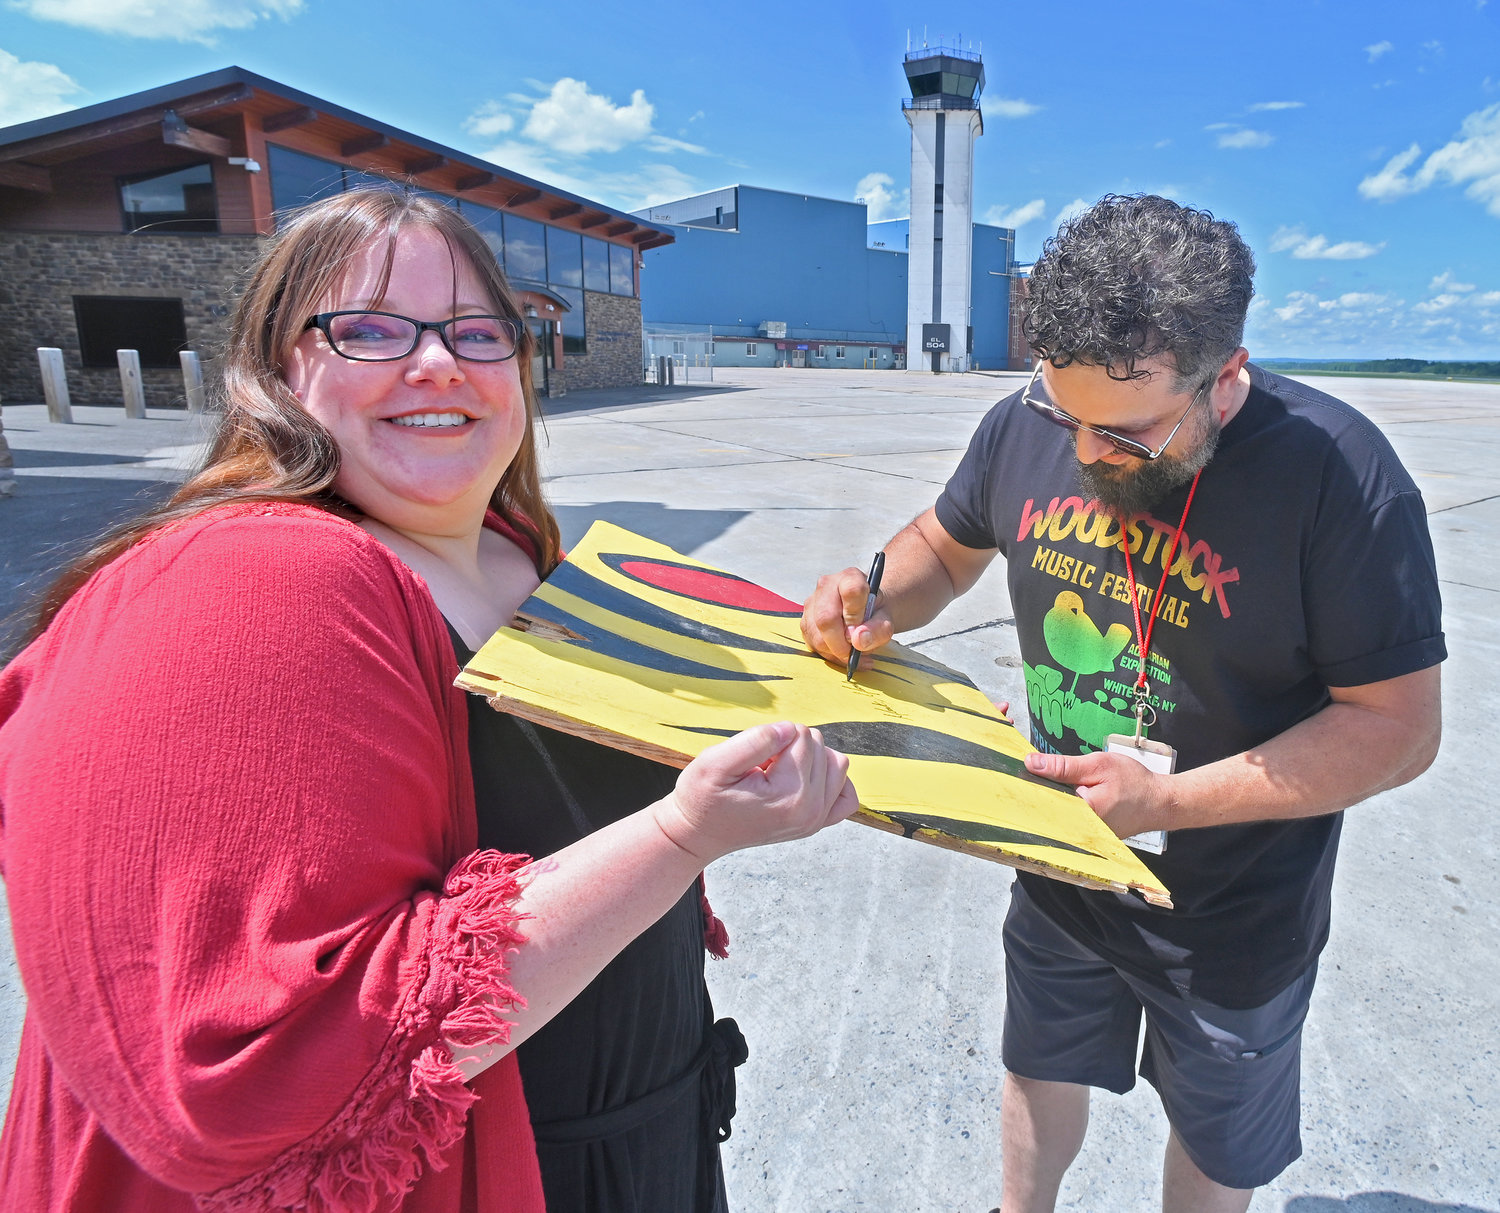 Maren Ondriska from Johnstown with Rome artist Mark Montalbano as he signs the 2x2 foot piece of Woodstock Girl he had painted 23 years ago for the Woodstock '99 music festival and was destroyed by concert goers along with all the other art that was created for the festival.